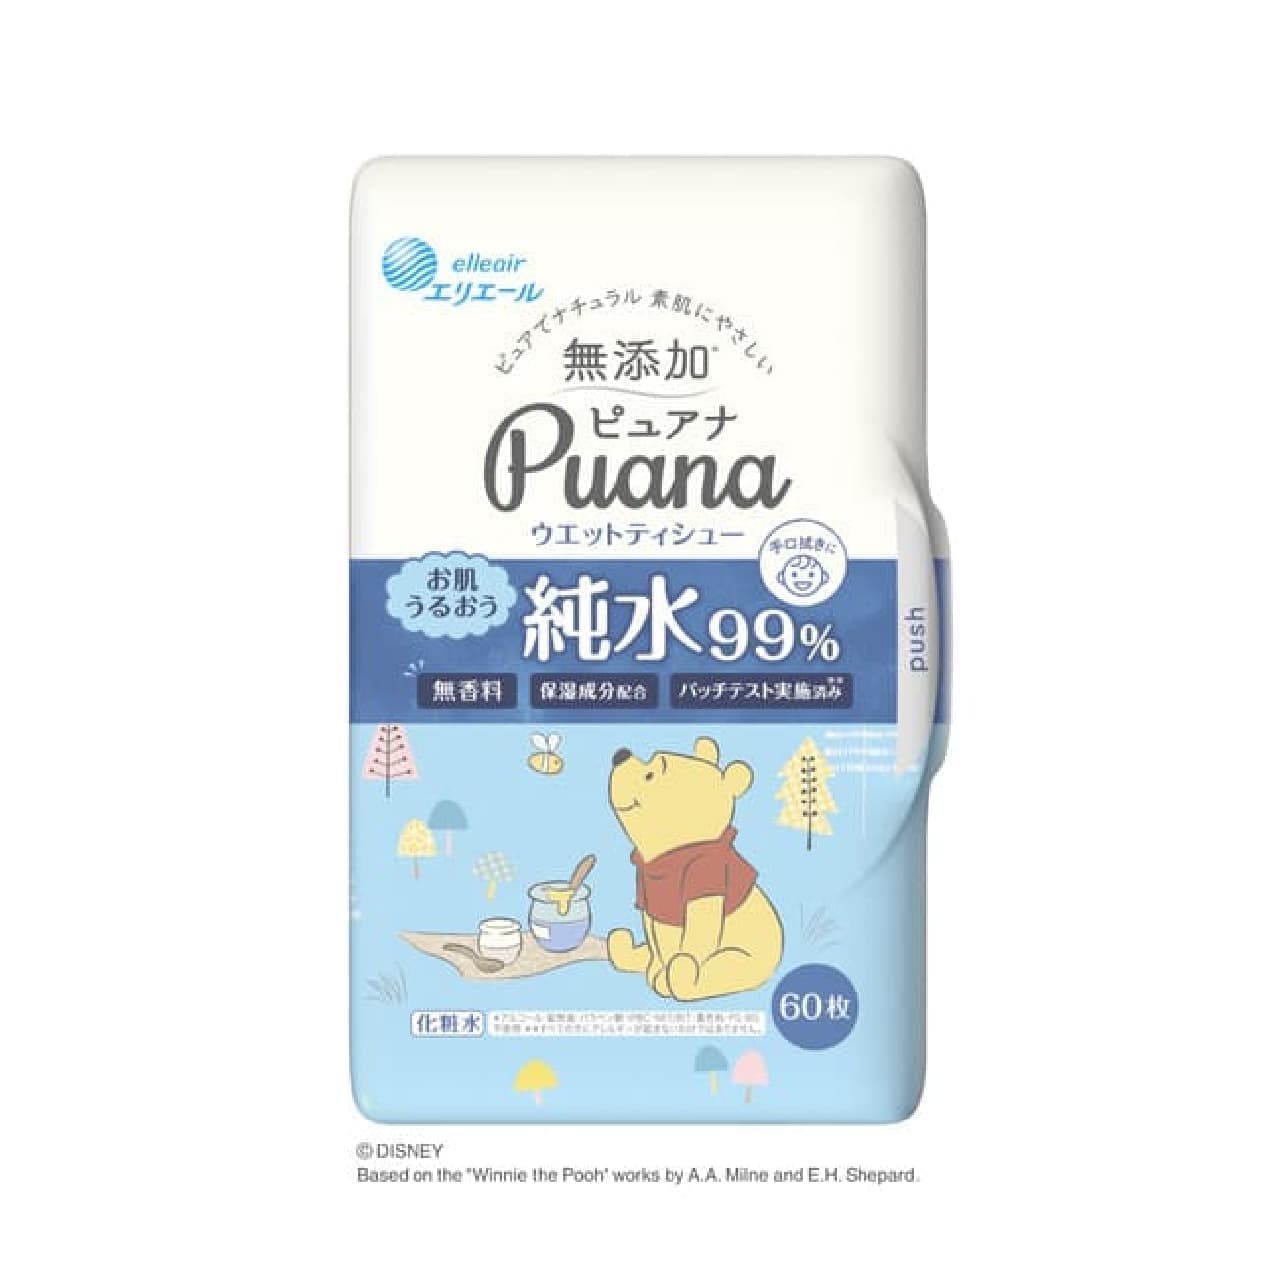 Eliel "Puana Wet Tissue" now with Winnie the Pooh pattern! Alcohol-free & with moisturizing ingredients